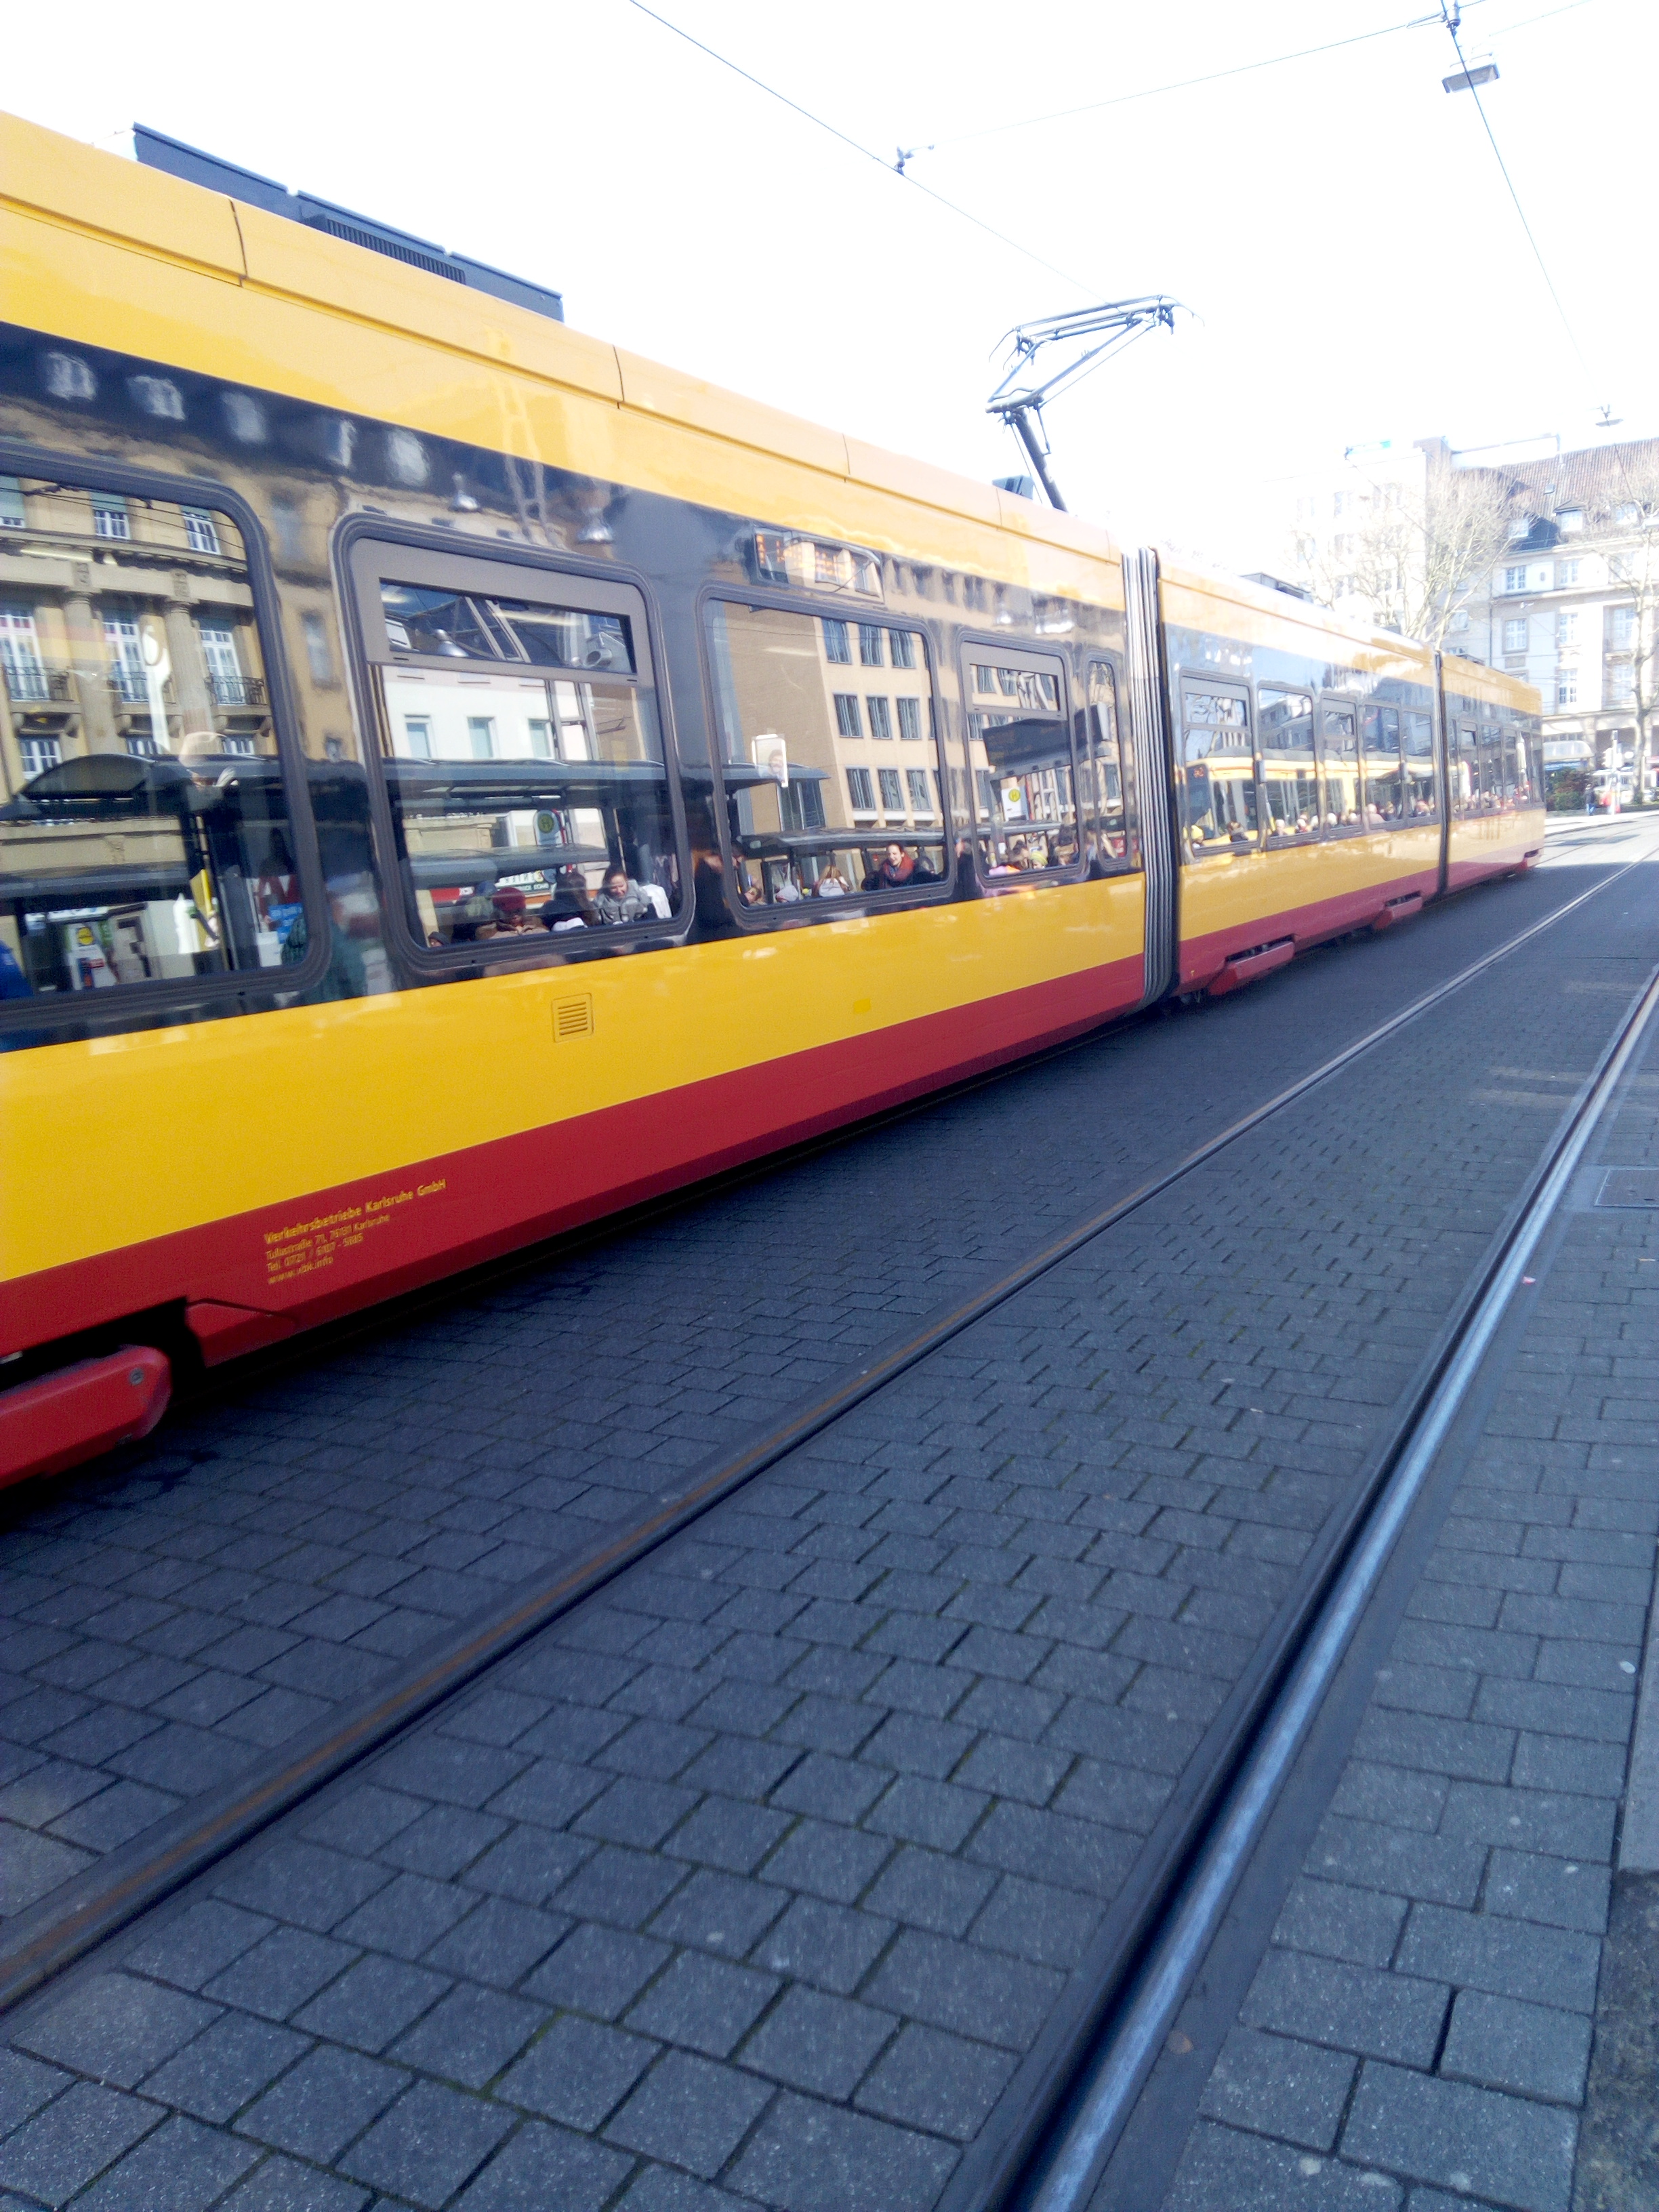 a tram image in Germany